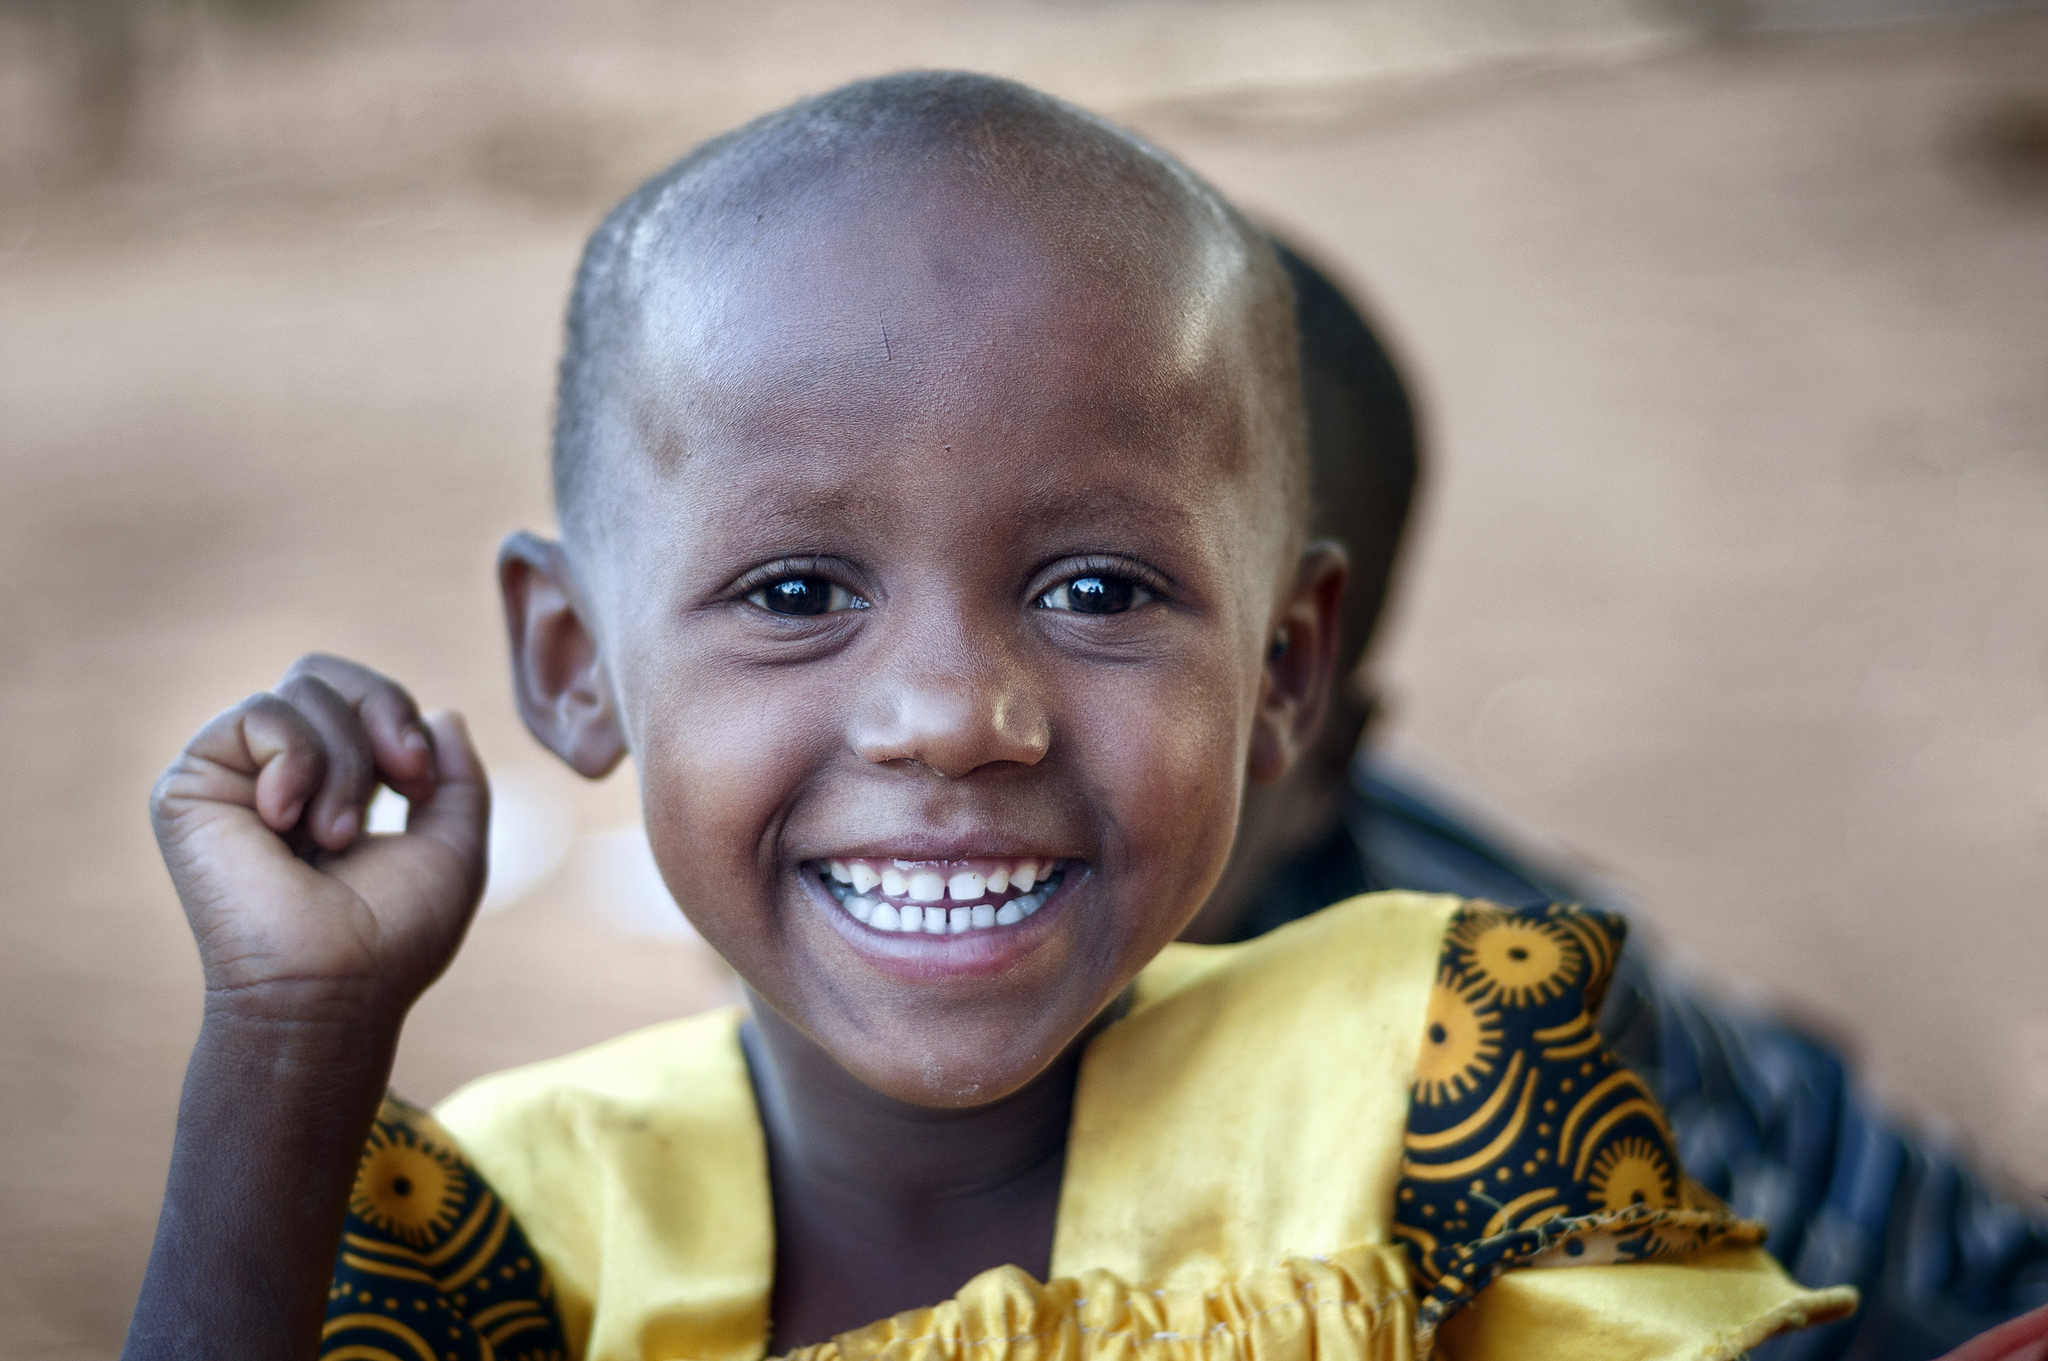 child in Kenya in a yellow dress